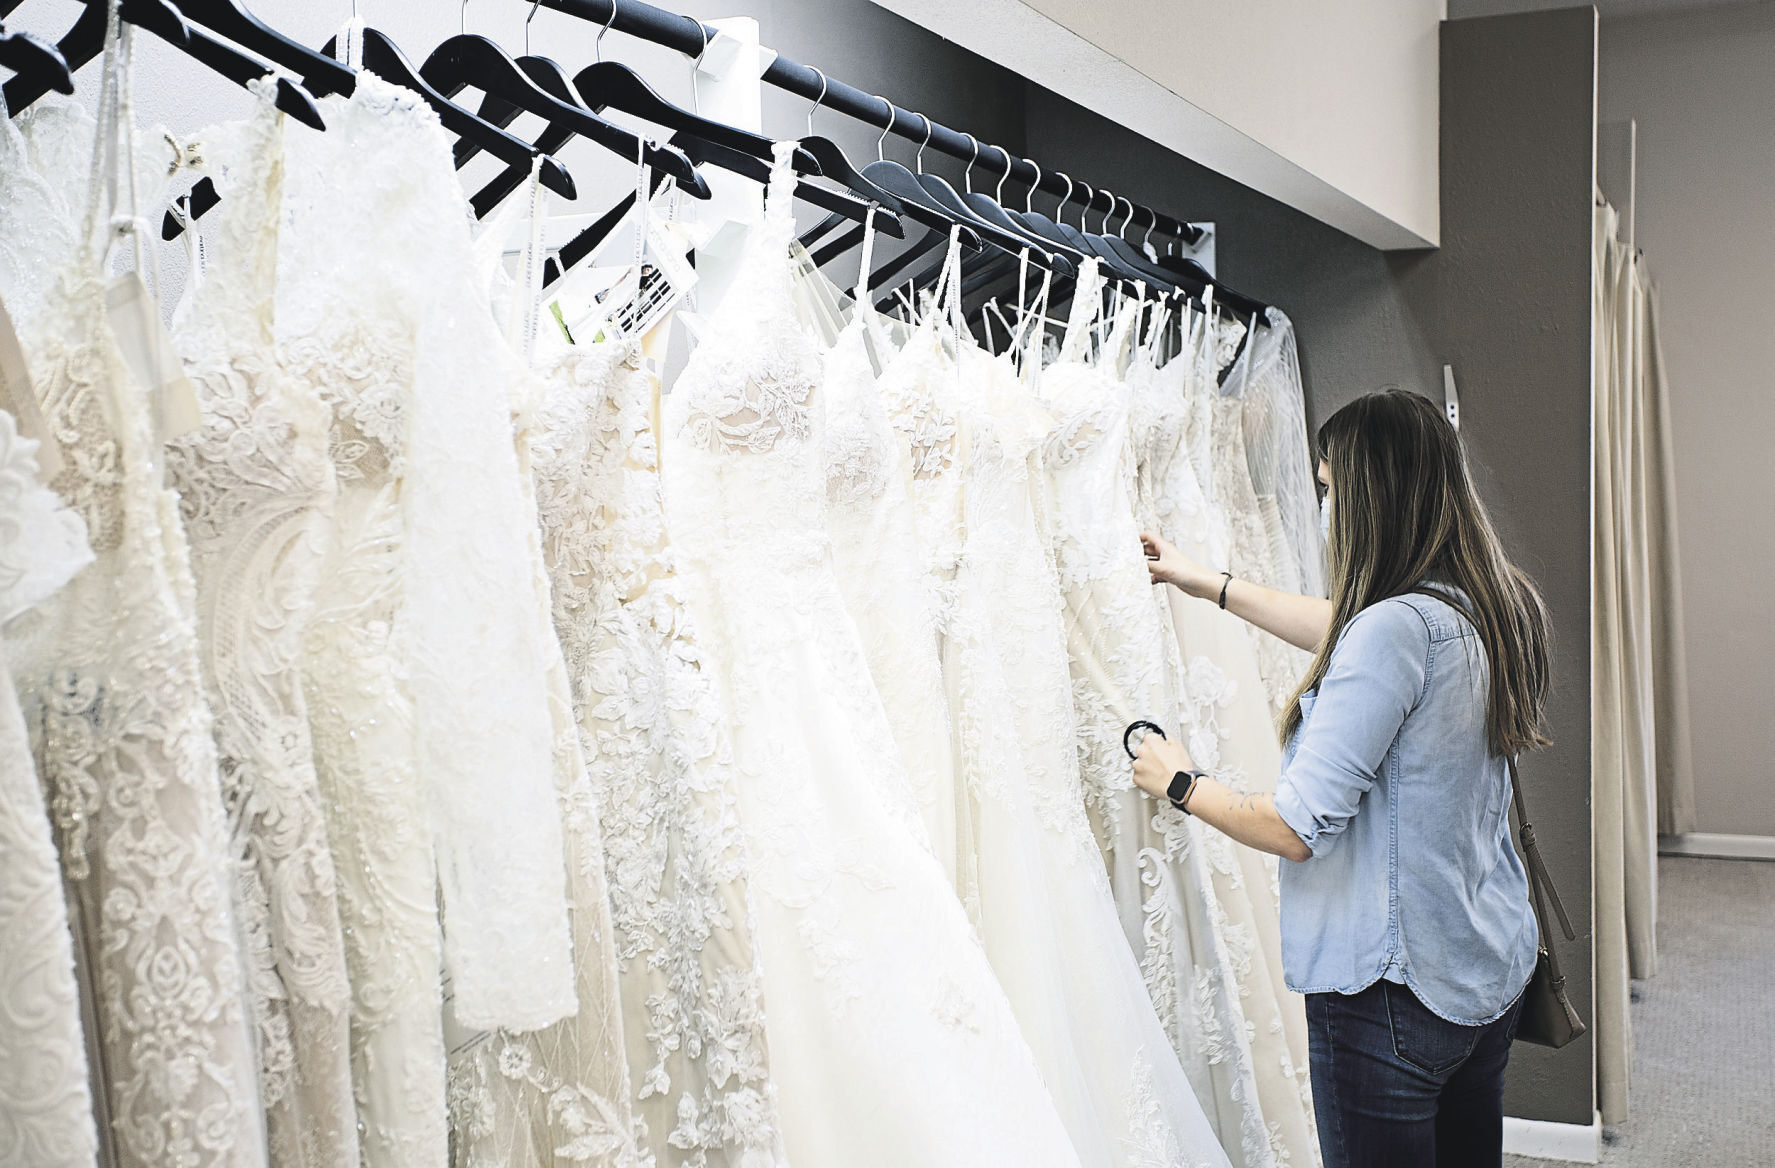 Taylor Tamling-Thurn looks for dresses at Brides & Weddings in Manchester, Iowa. PHOTO CREDIT: Stephen Gassman